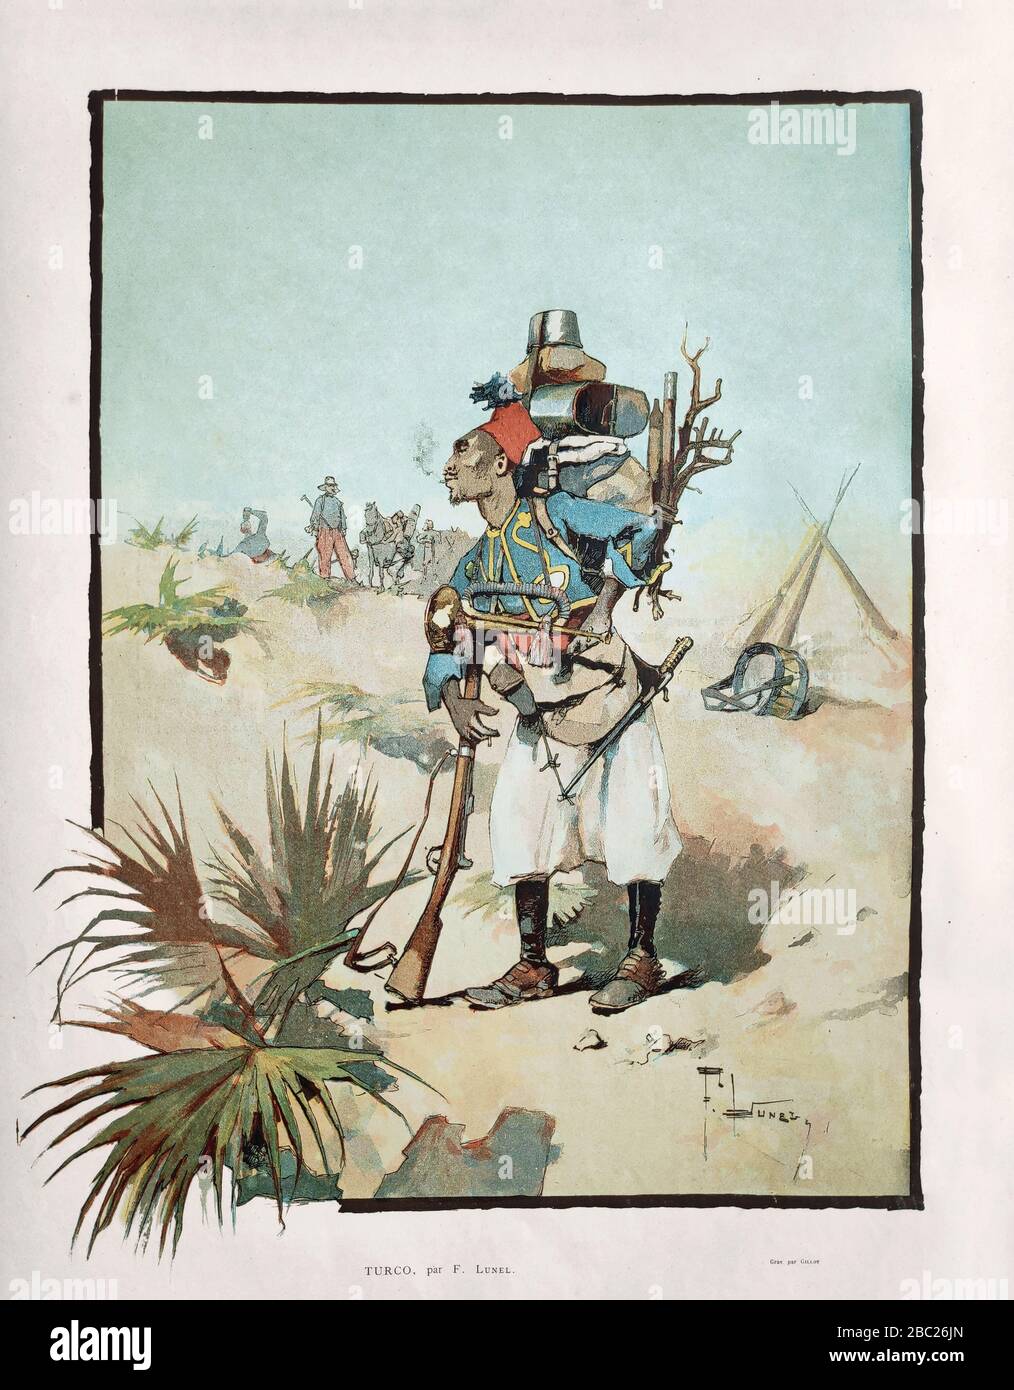 Illustration about a soldier of the Ottoman empire entitled "Turco" by F. Lunel and engraved by Gillot published in 1884. Stock Photo